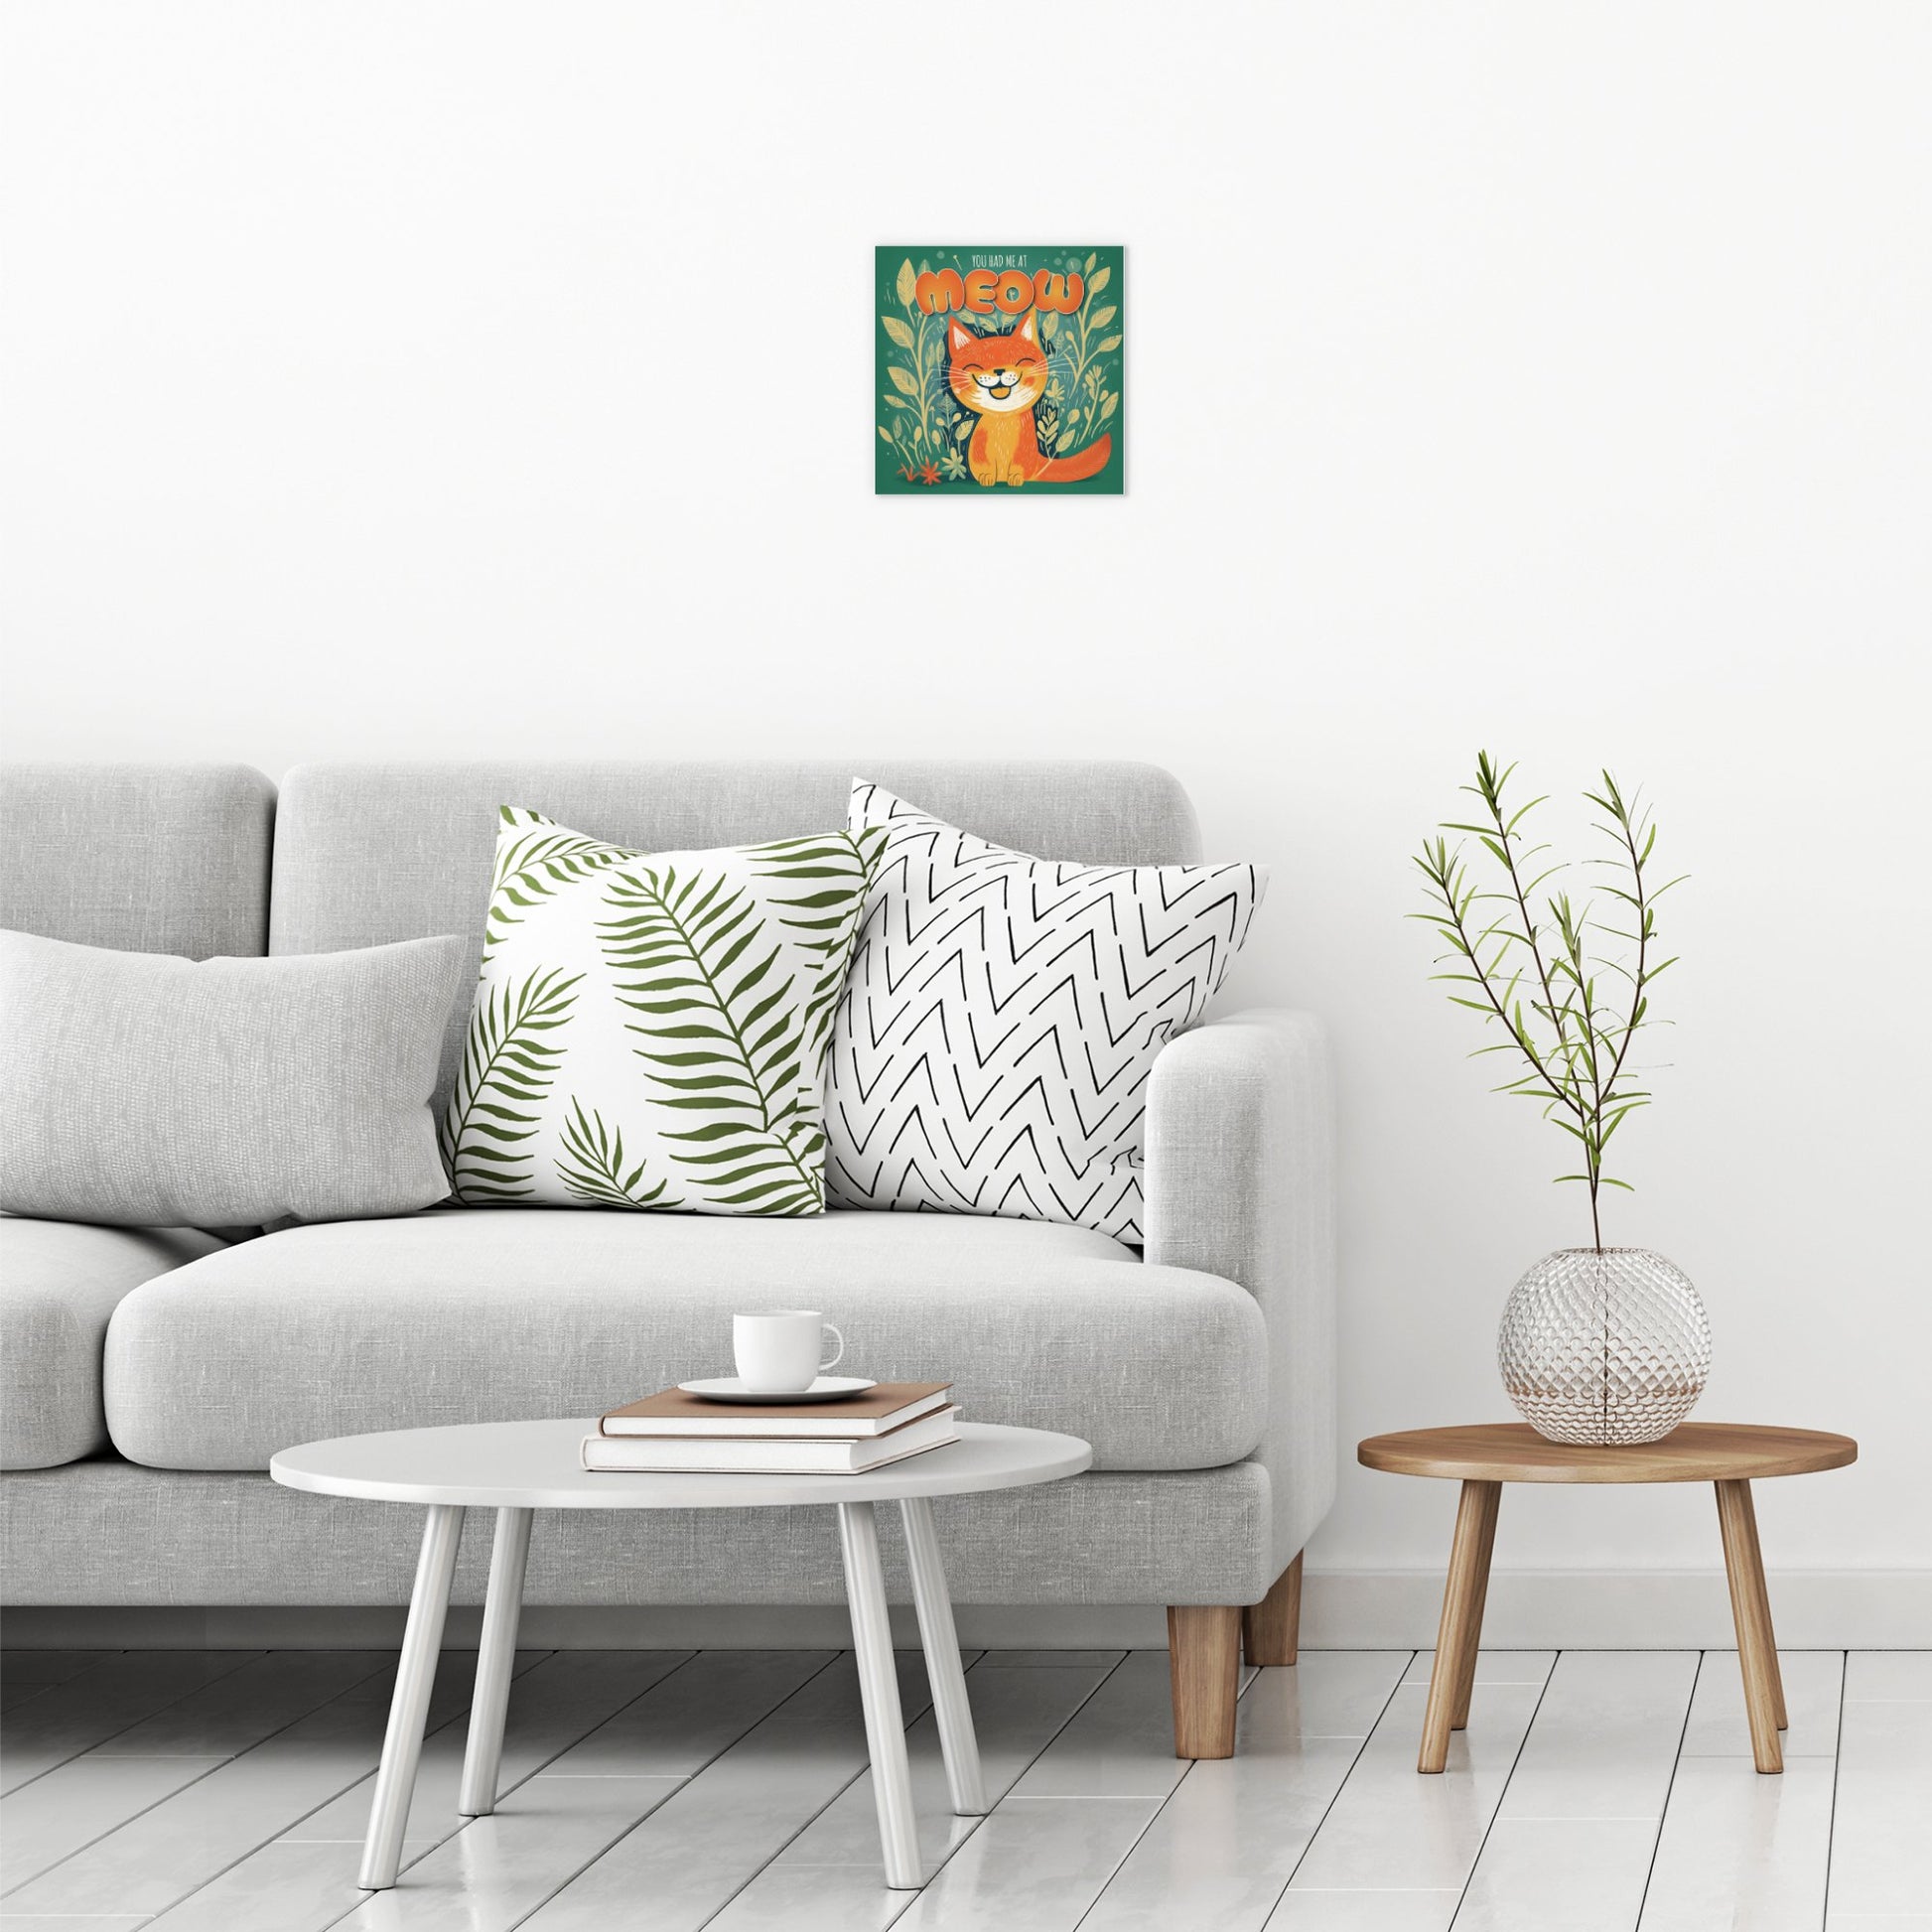 A contemporary modern room view showing a small size metal art poster display plate with printed design of a You Had Me At Meow - Cute Cat Quote